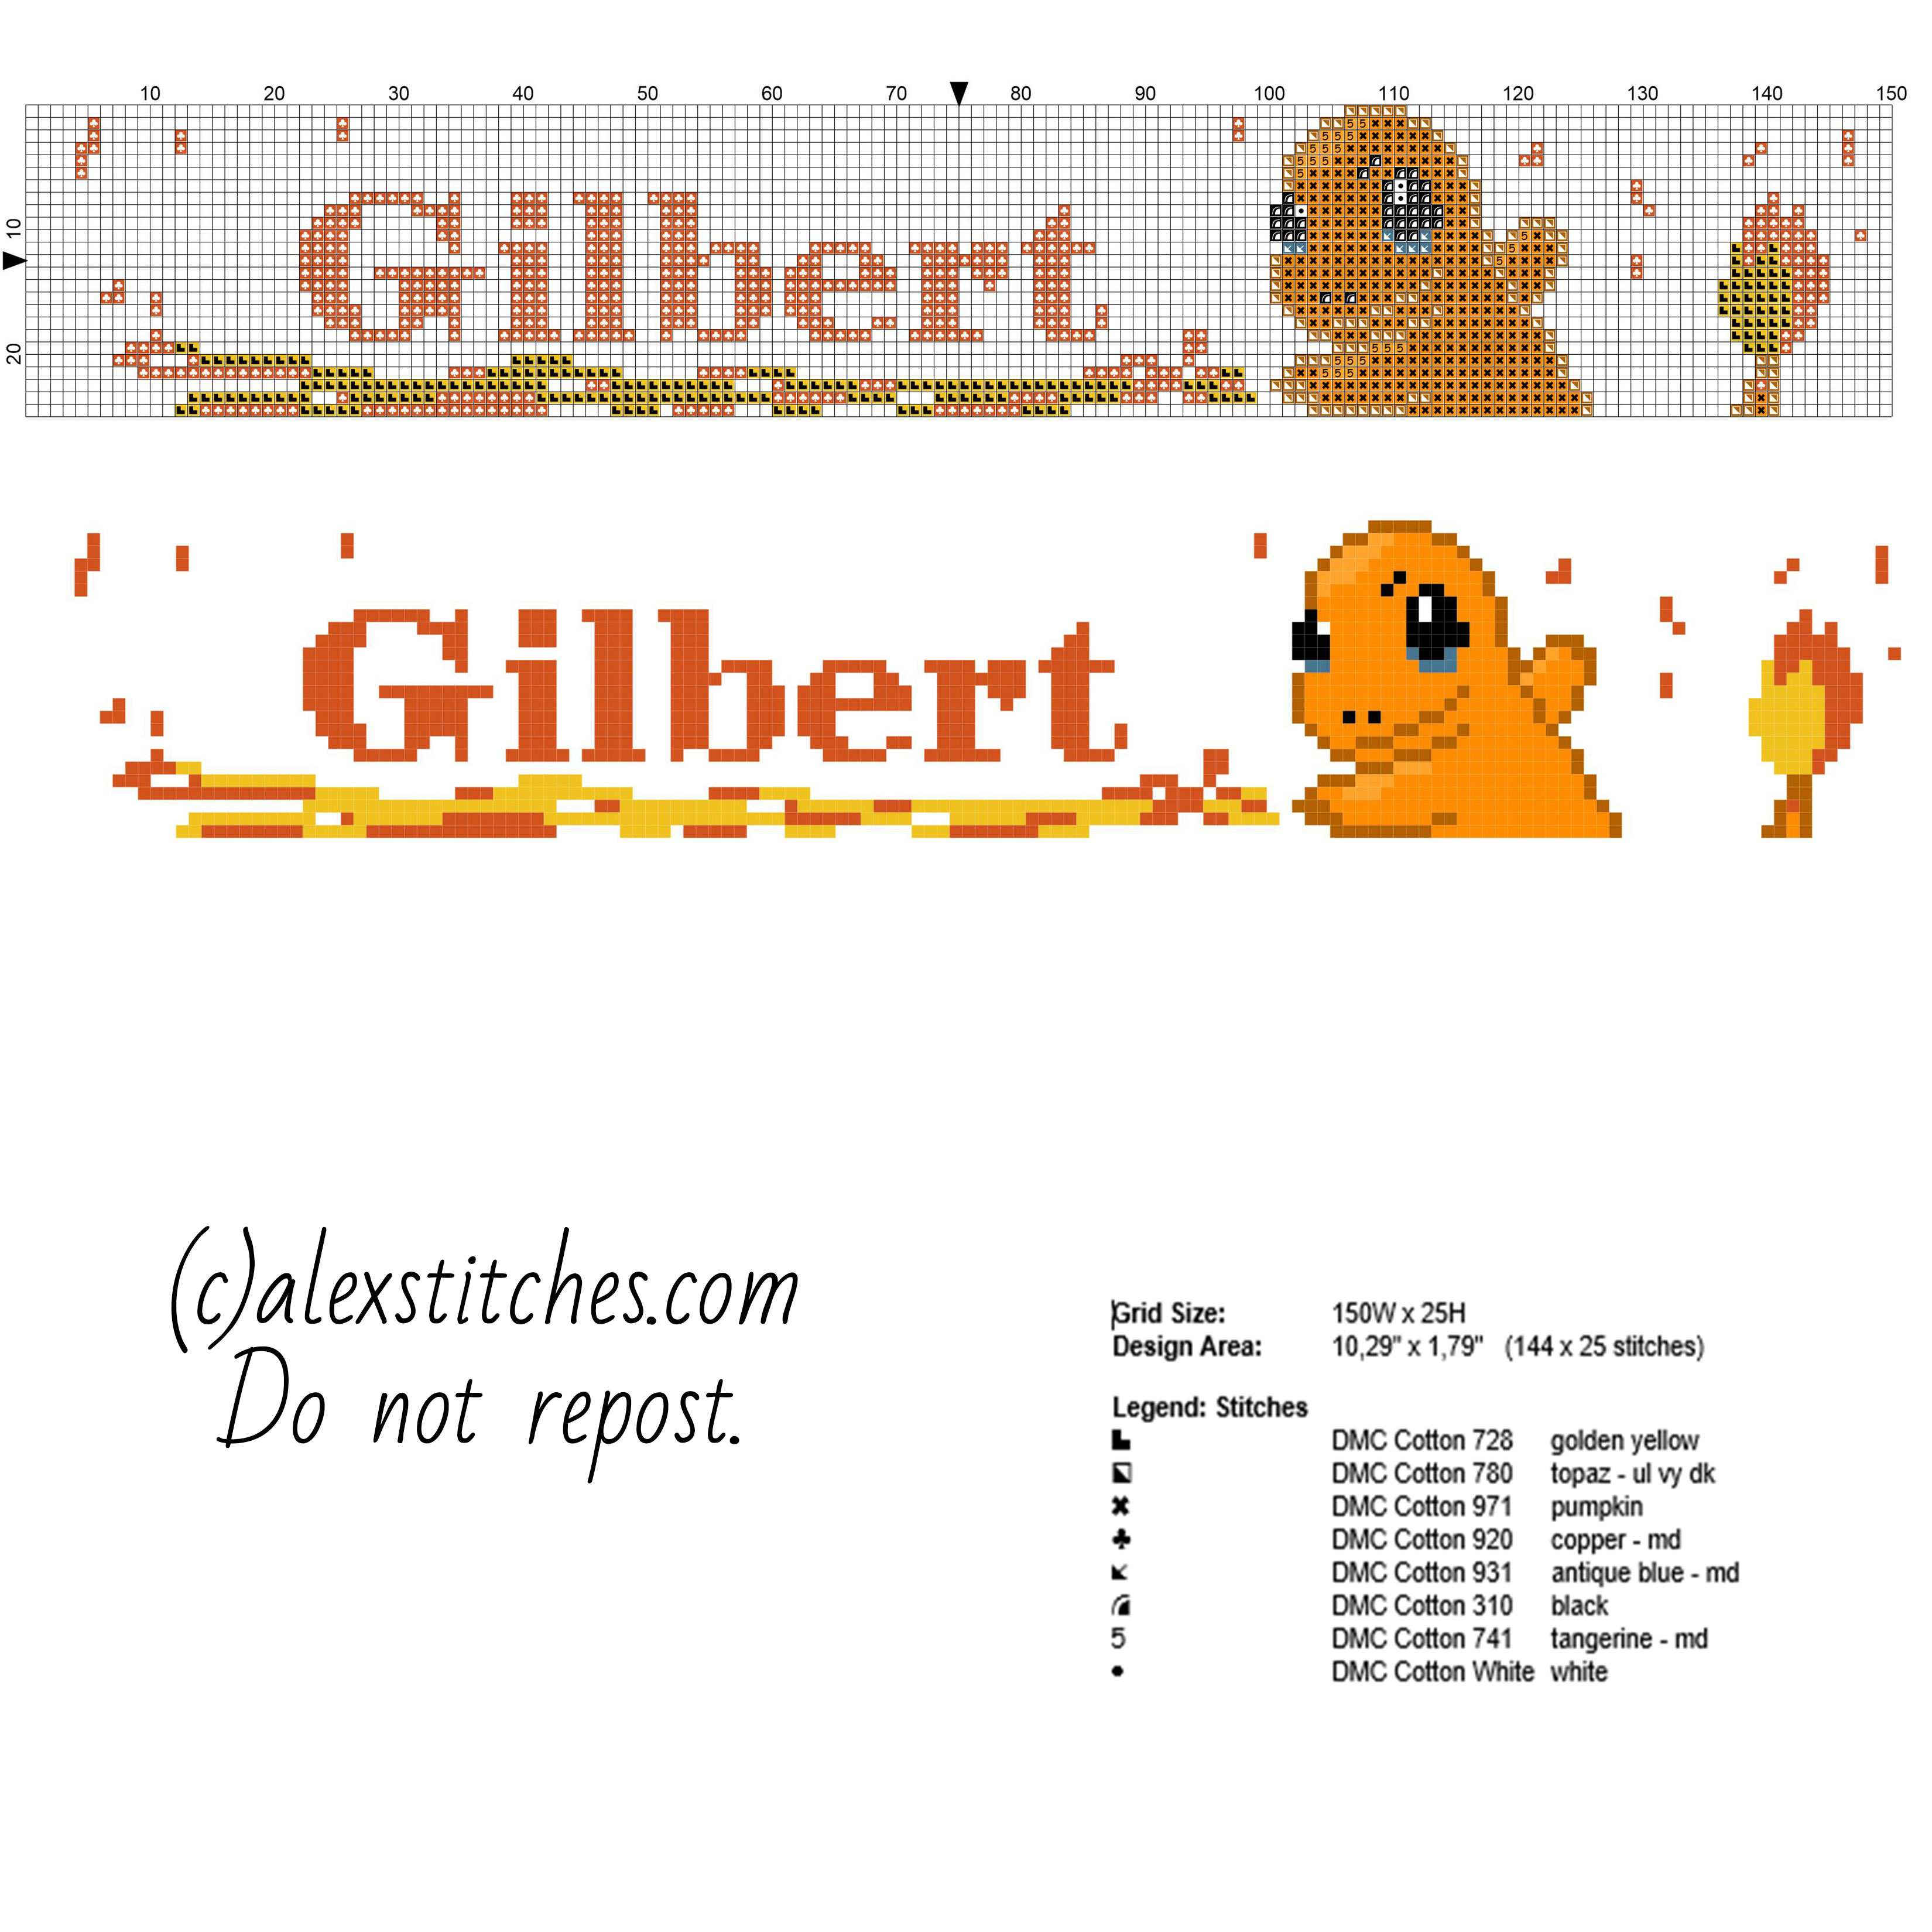 Gilbert cross stitch baby male name with Pokemon Charmander and flames free download baby bibs idea